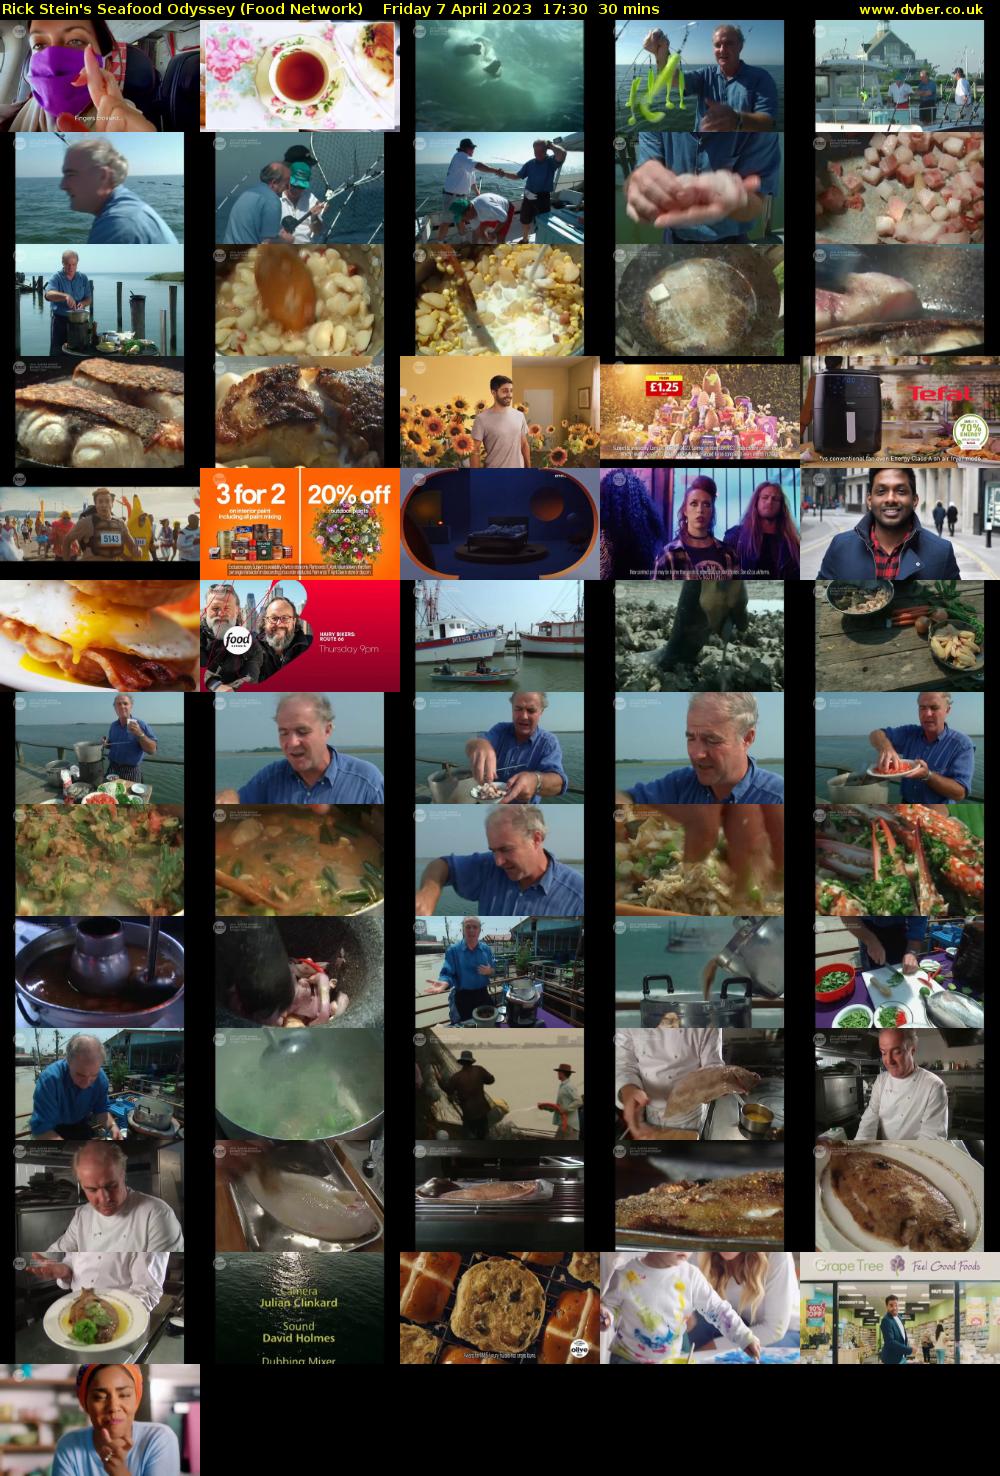 Rick Stein's Seafood Odyssey (Food Network) Friday 7 April 2023 17:30 - 18:00